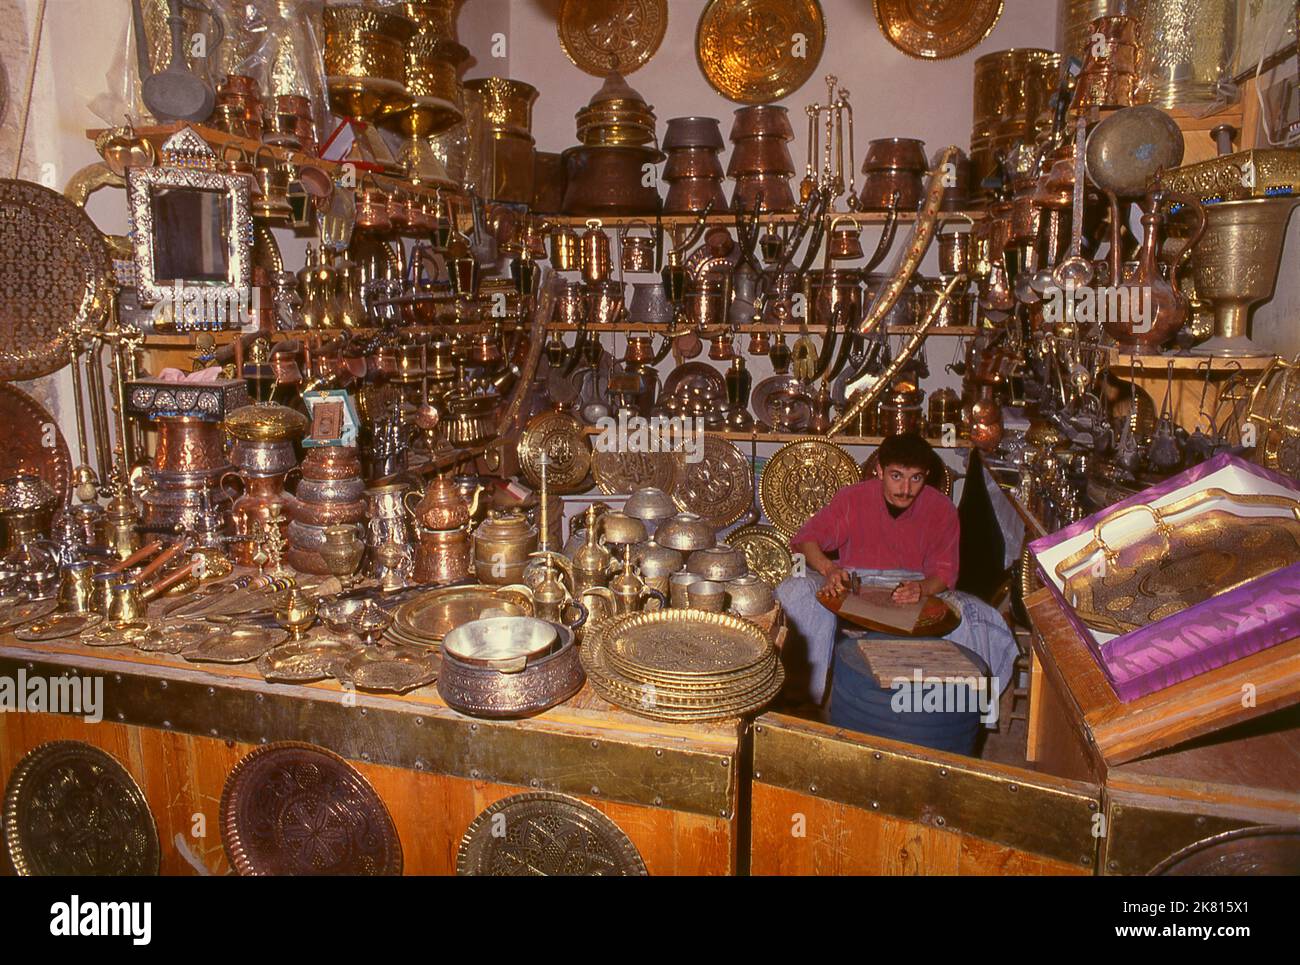 Syria: Brassware artisan in the ancient Great Bazaar, Aleppo (1997). Aleppo's Great Bazaar (in Arabic, suq or souq) was rebuilt first by the Egyptian Mamelukes who drove out the Mongols, and then, after 1516, by the Turks who incorporated Aleppo into the Ottoman Empire. During the Syrian Civil War, which started in 2011, Aleppo's historic suqs suffered serious damage.  Aleppo, the second city of Syria is possibly the longest continually inhabited settlement in the world. Its Arabic name, Halab, is mentioned in Semitic texts of the third millennium BCE. Stock Photo